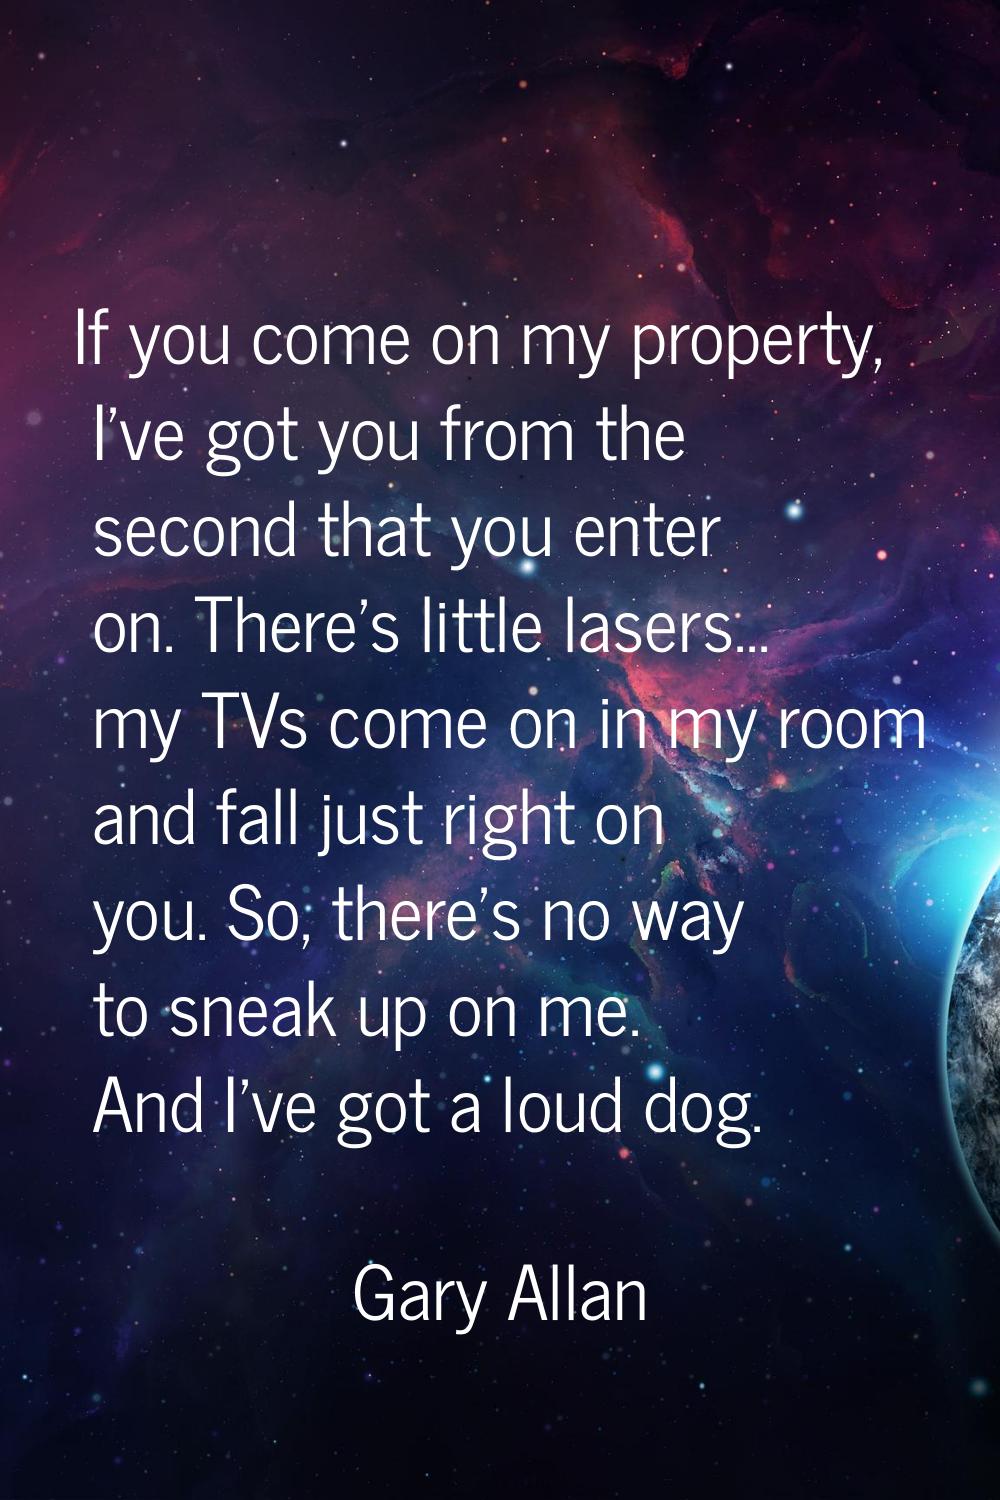 If you come on my property, I've got you from the second that you enter on. There's little lasers..